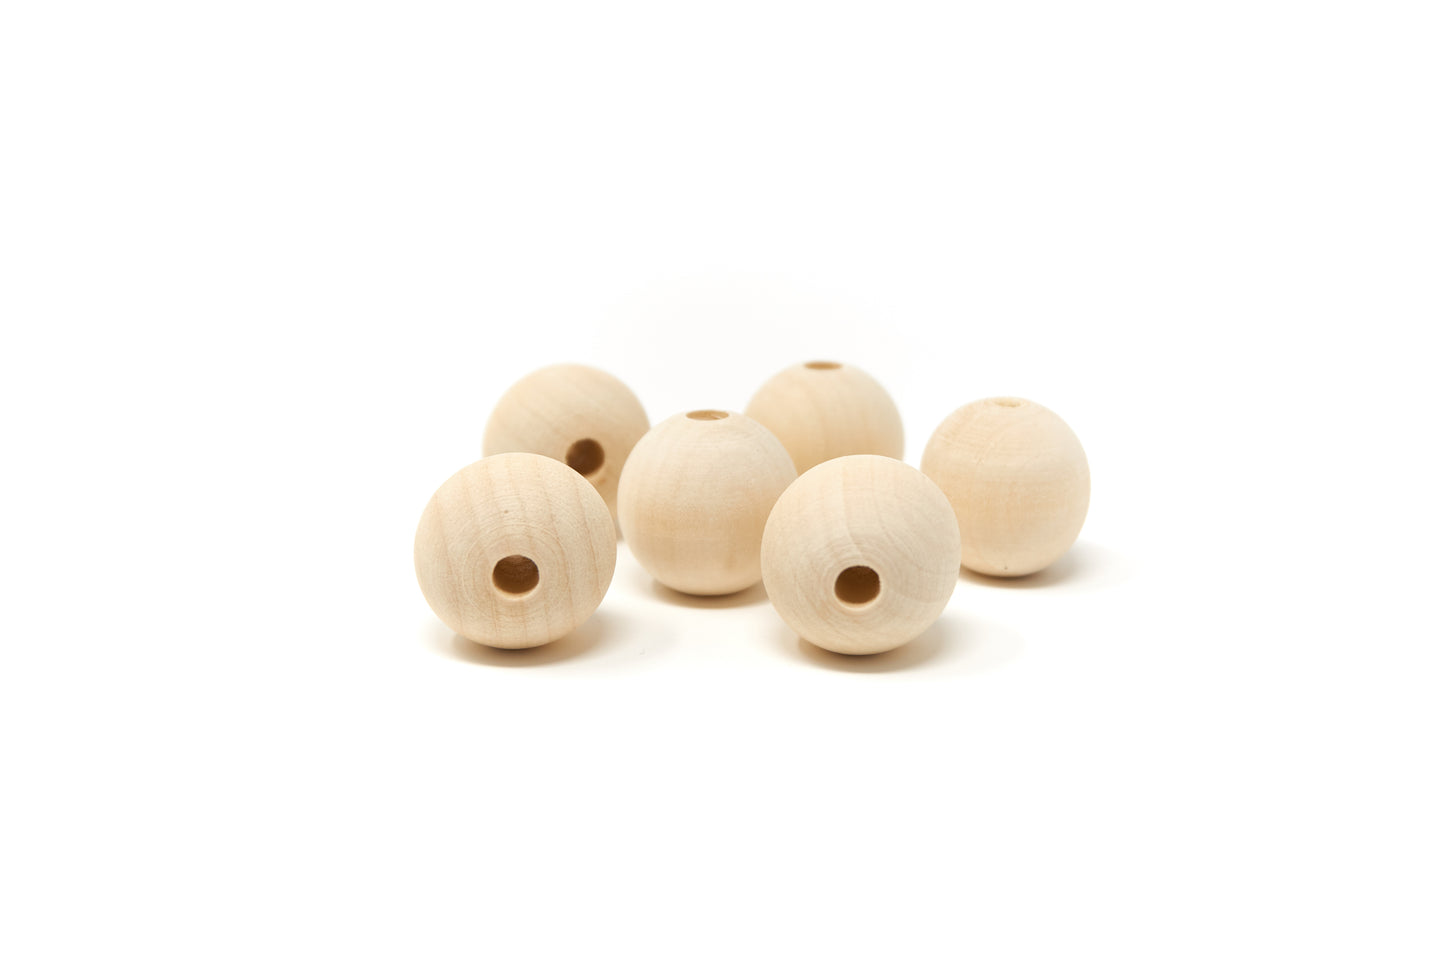 Natural Round Wood Beads 18mm 100 pieces - Cameos Art Shop